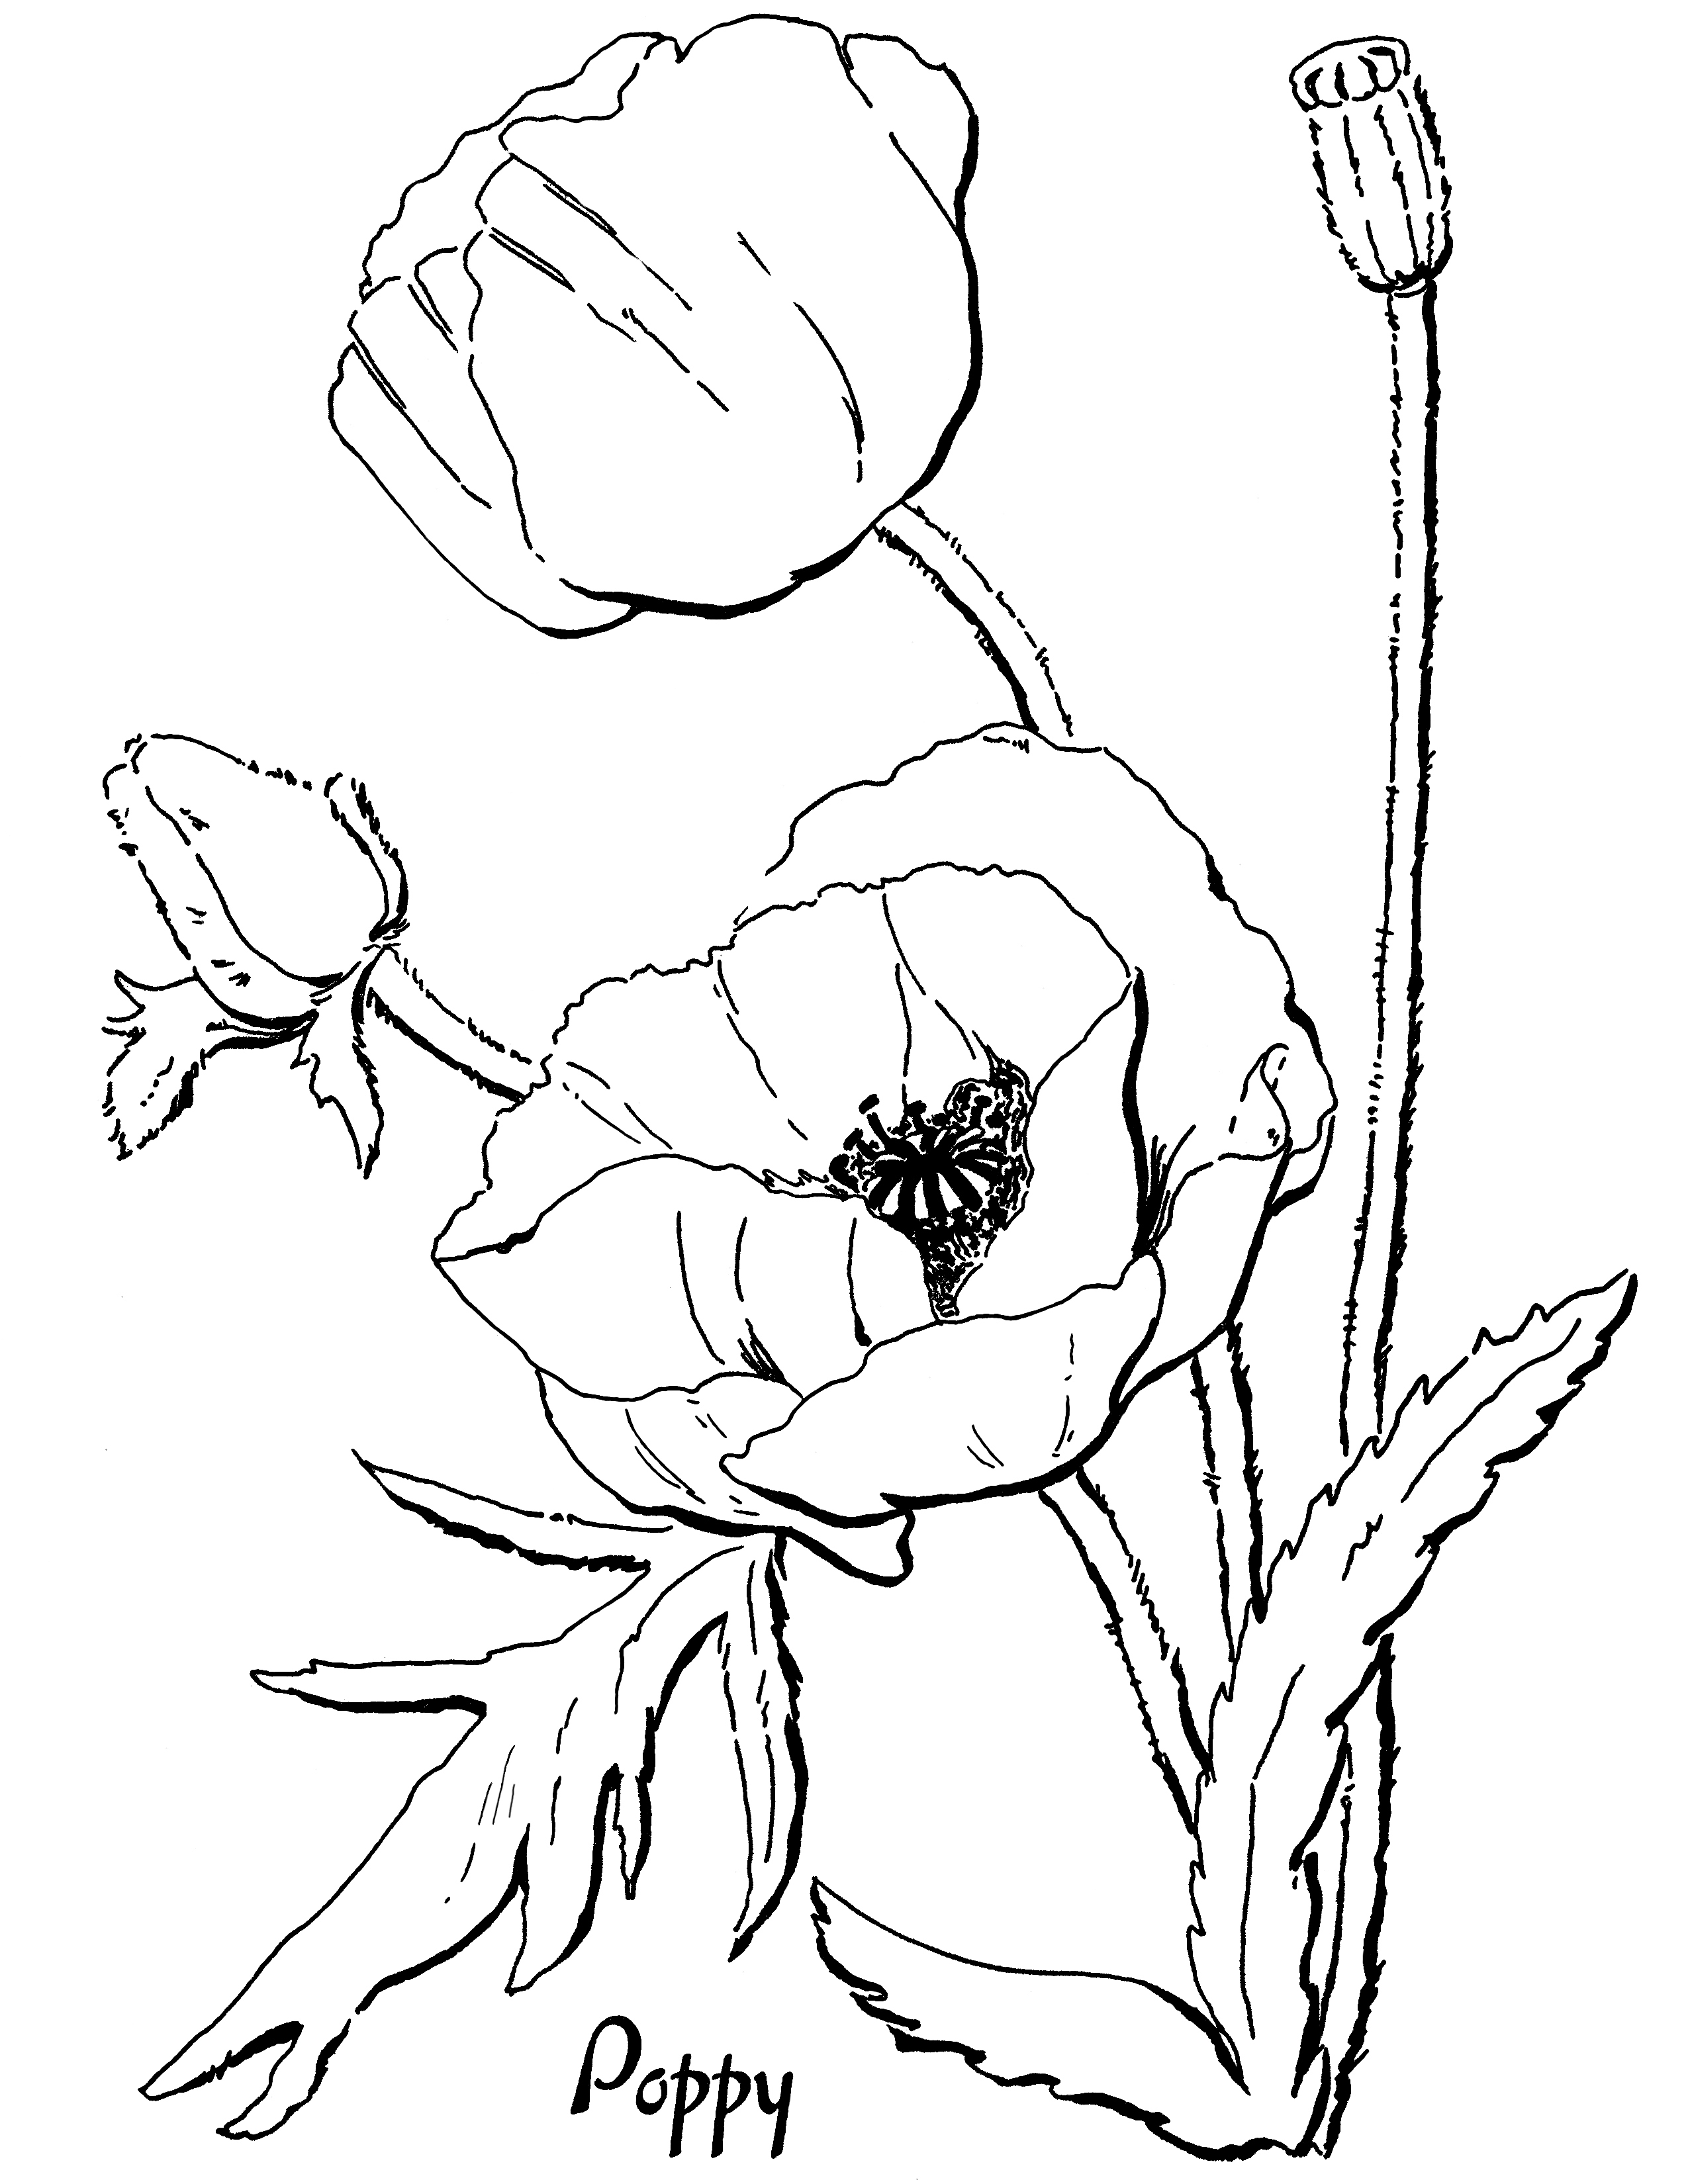 Poppy coloring #4, Download drawings